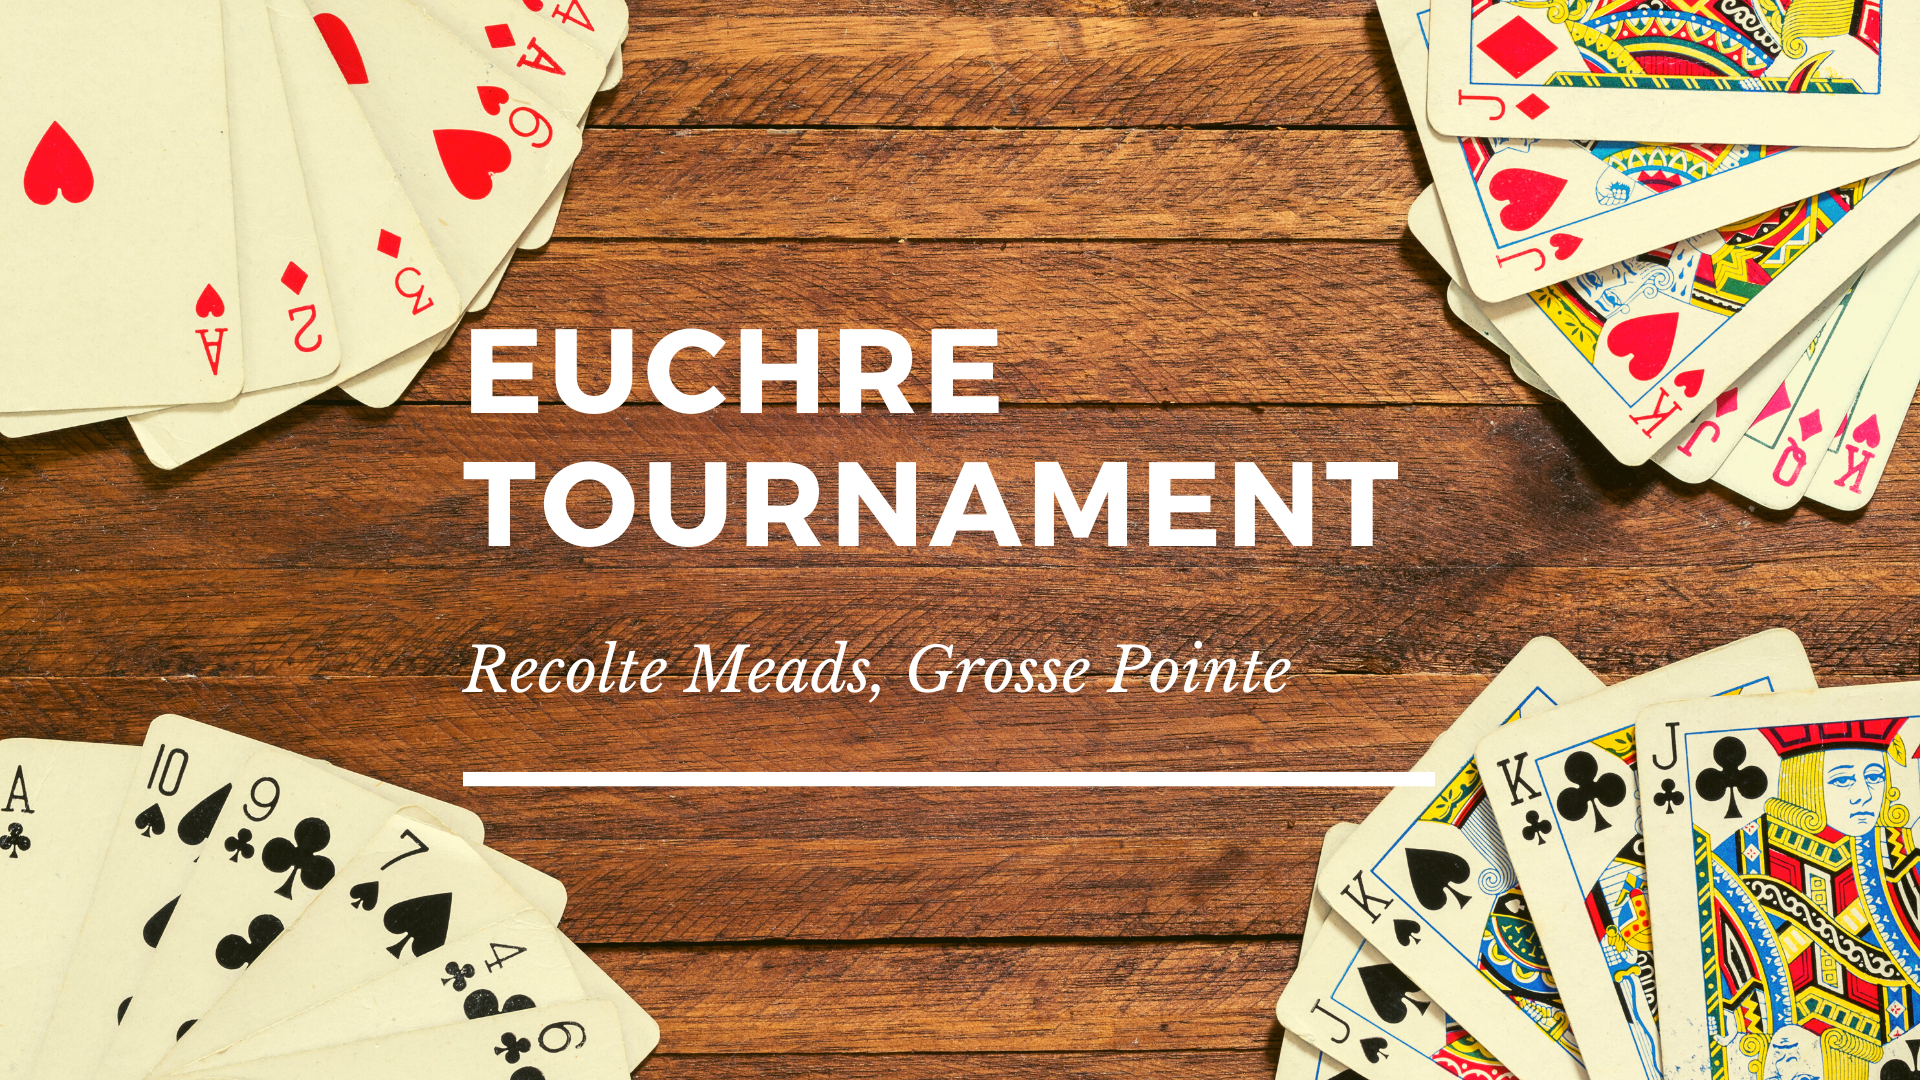 Euchre Night at Recolte Meads, Grosse Pointe